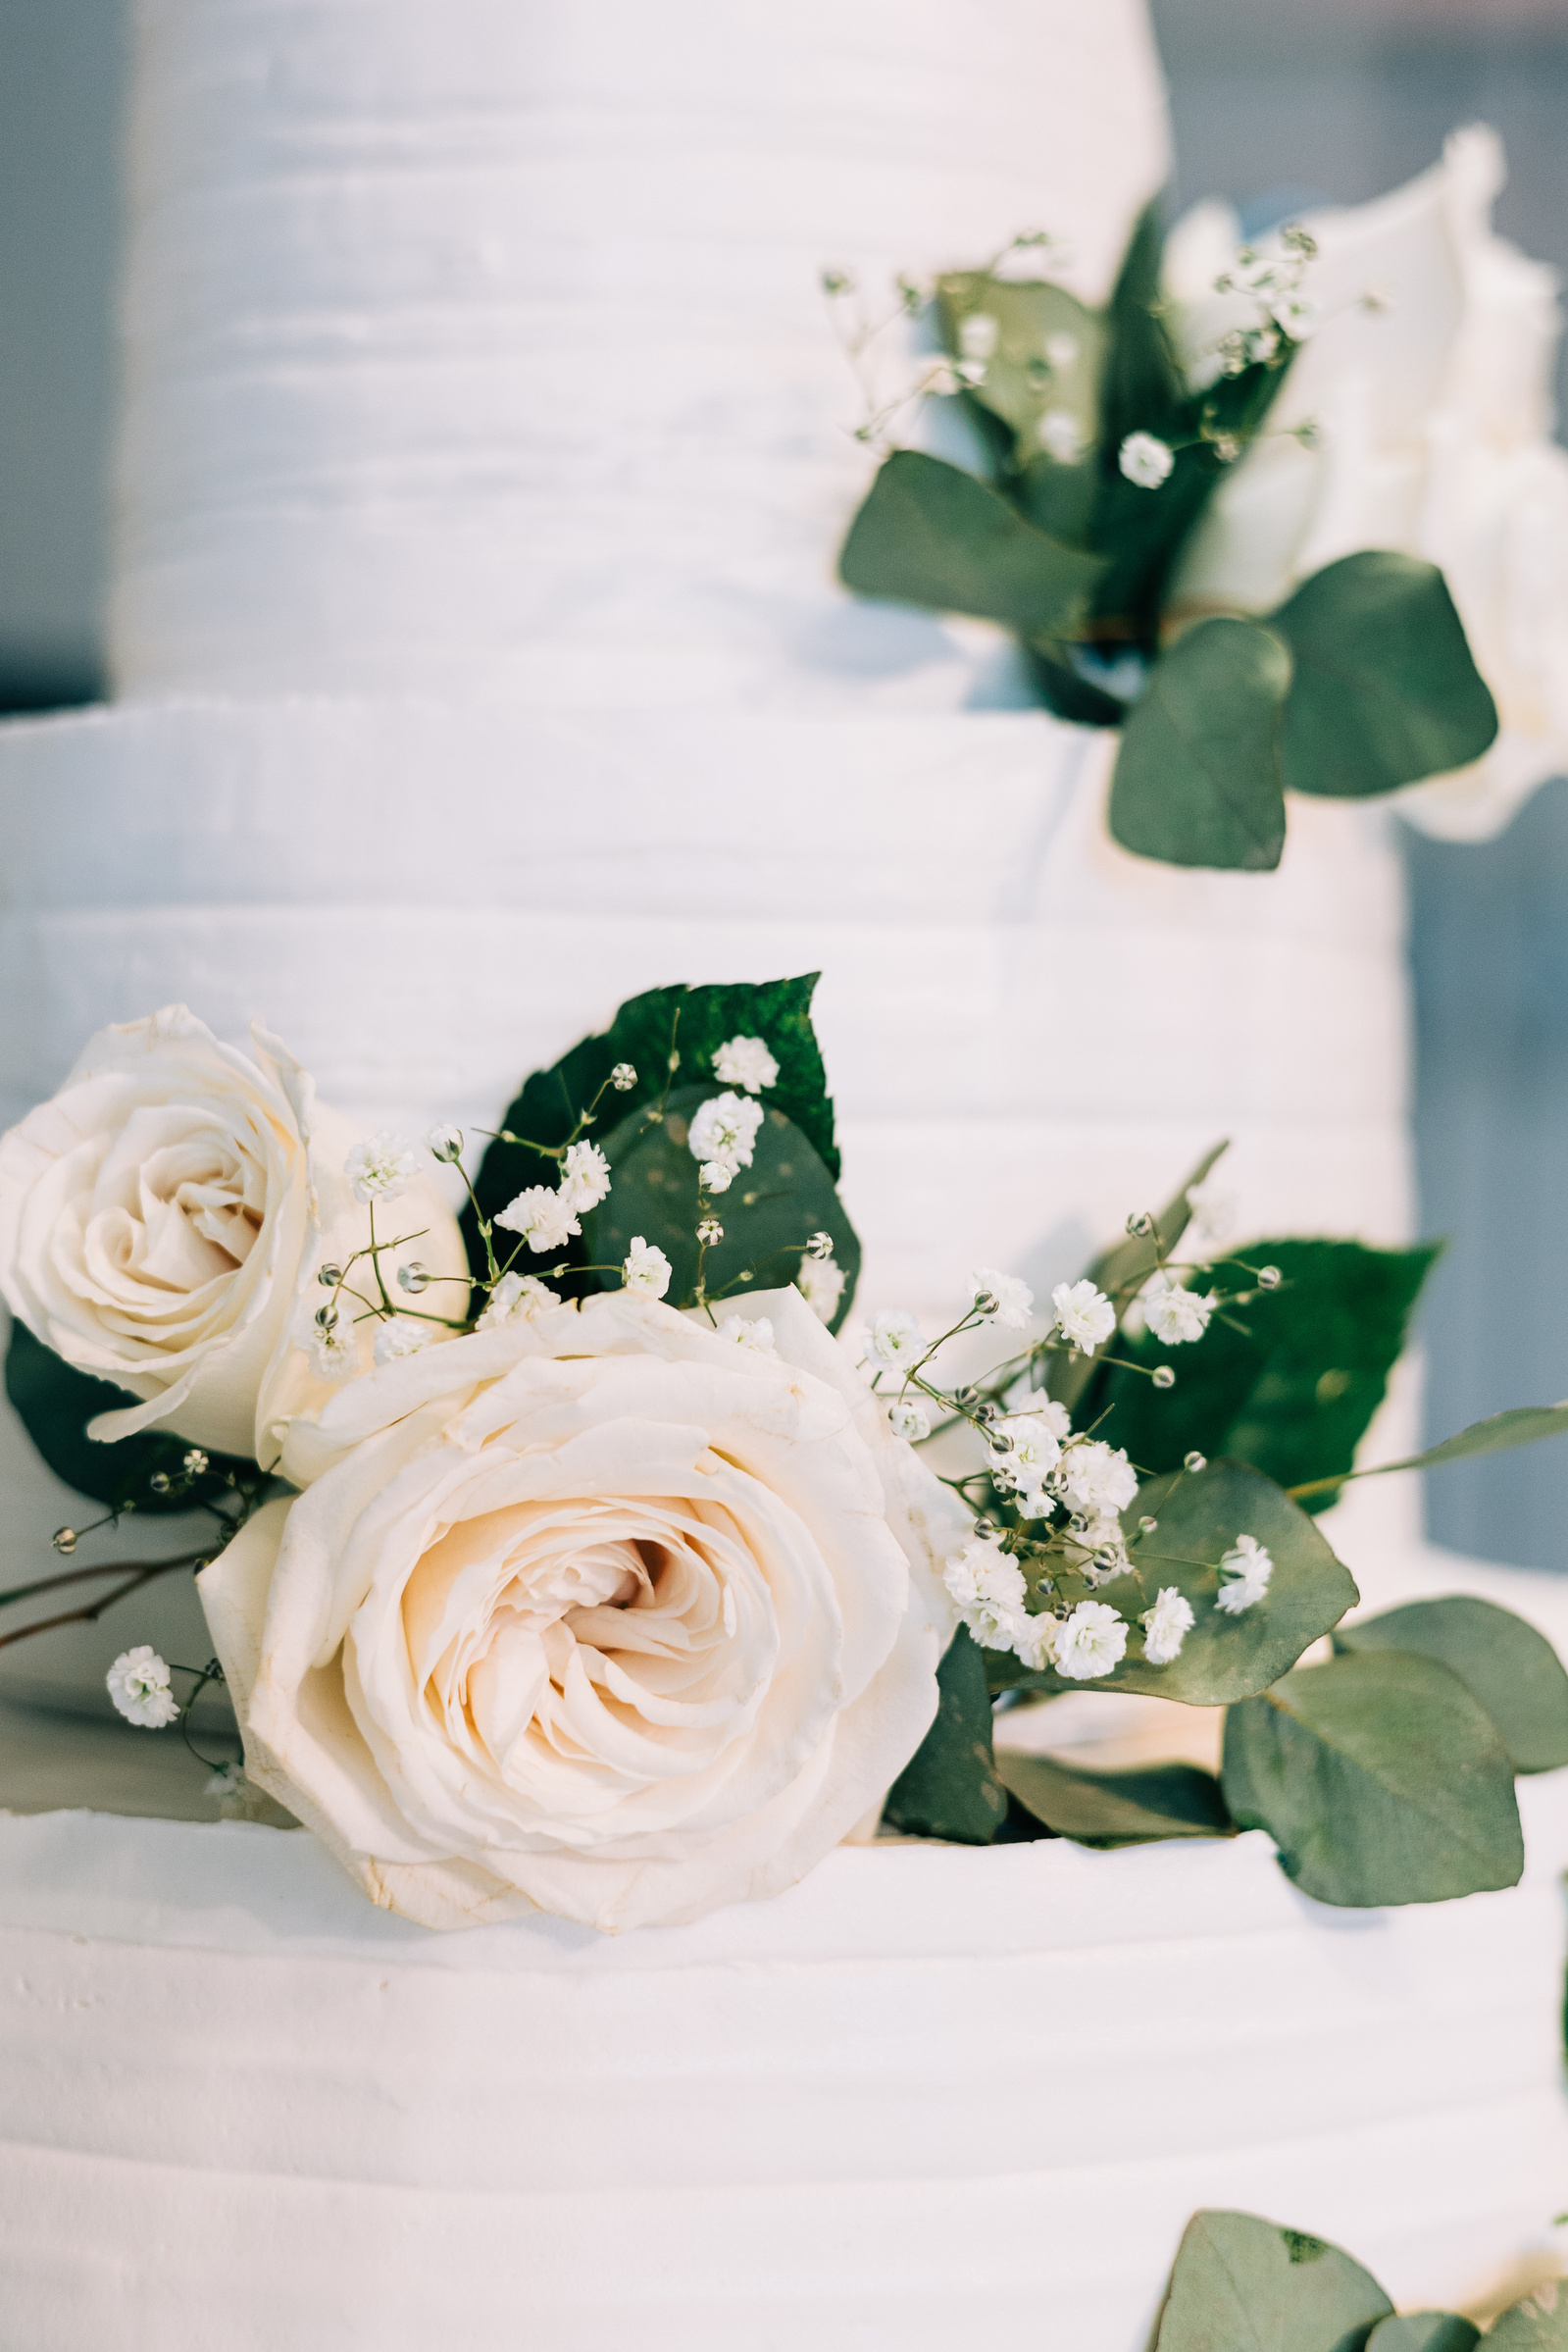 white tiered wedding cake with white roses and greenery